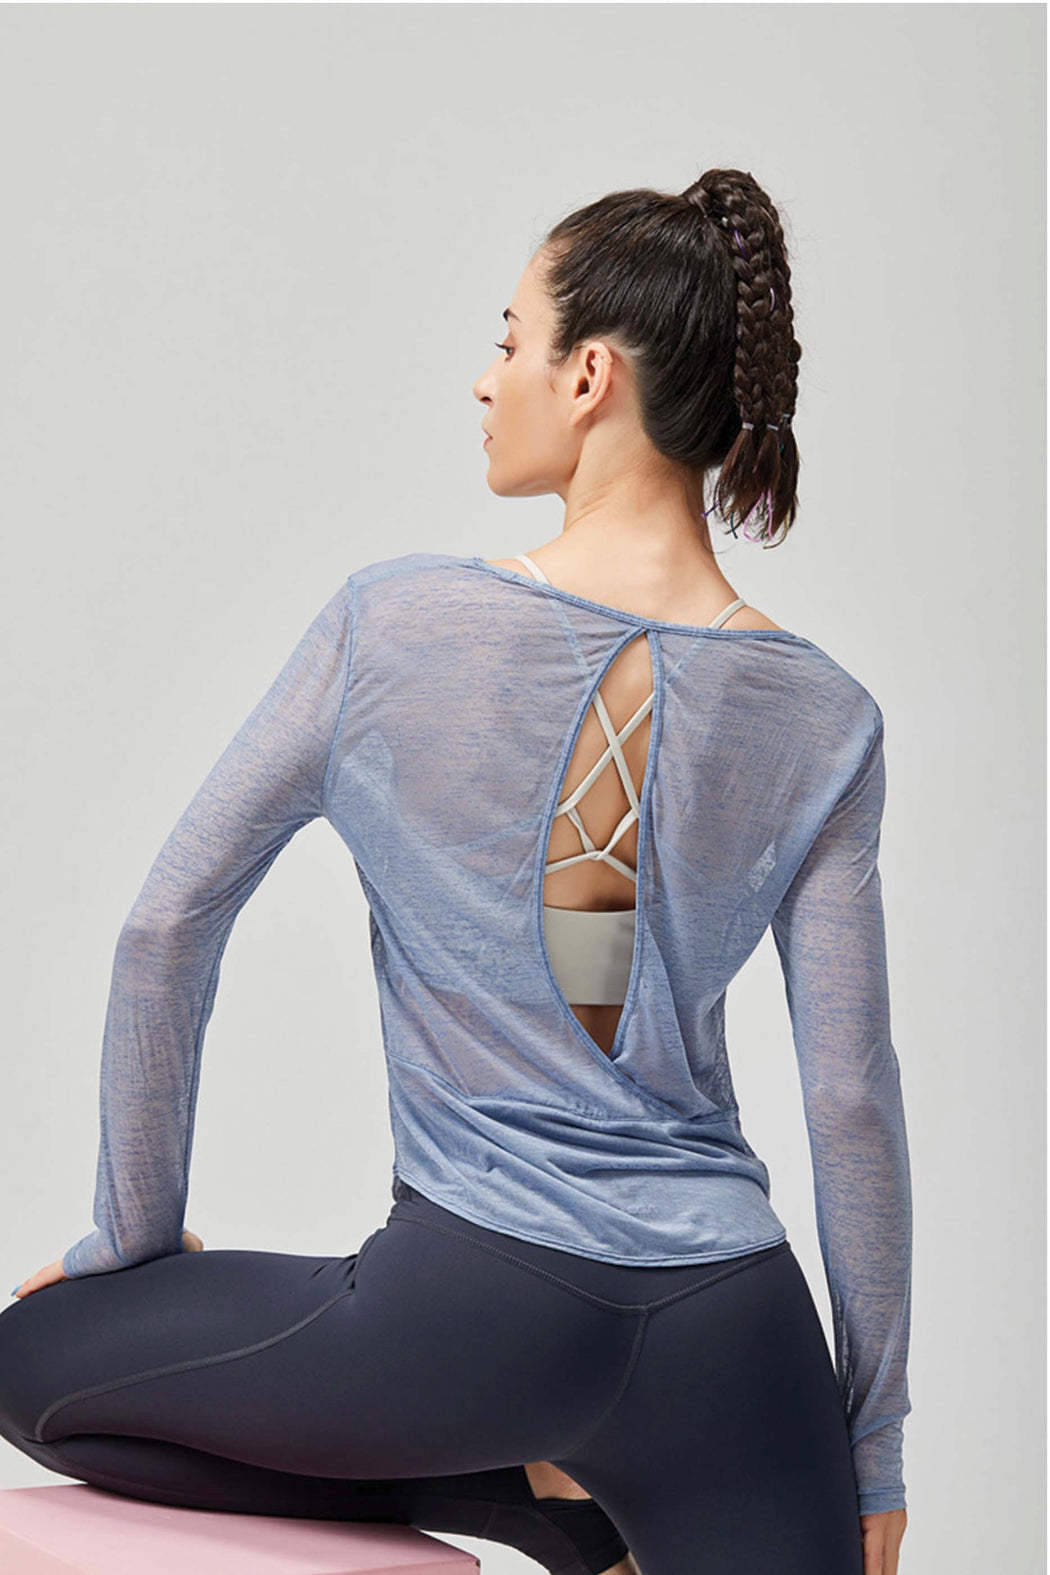 LUV Movement Open Back Long Sleeve Shirts (Actigard - Anti-Mosquito Innovative Fabric)